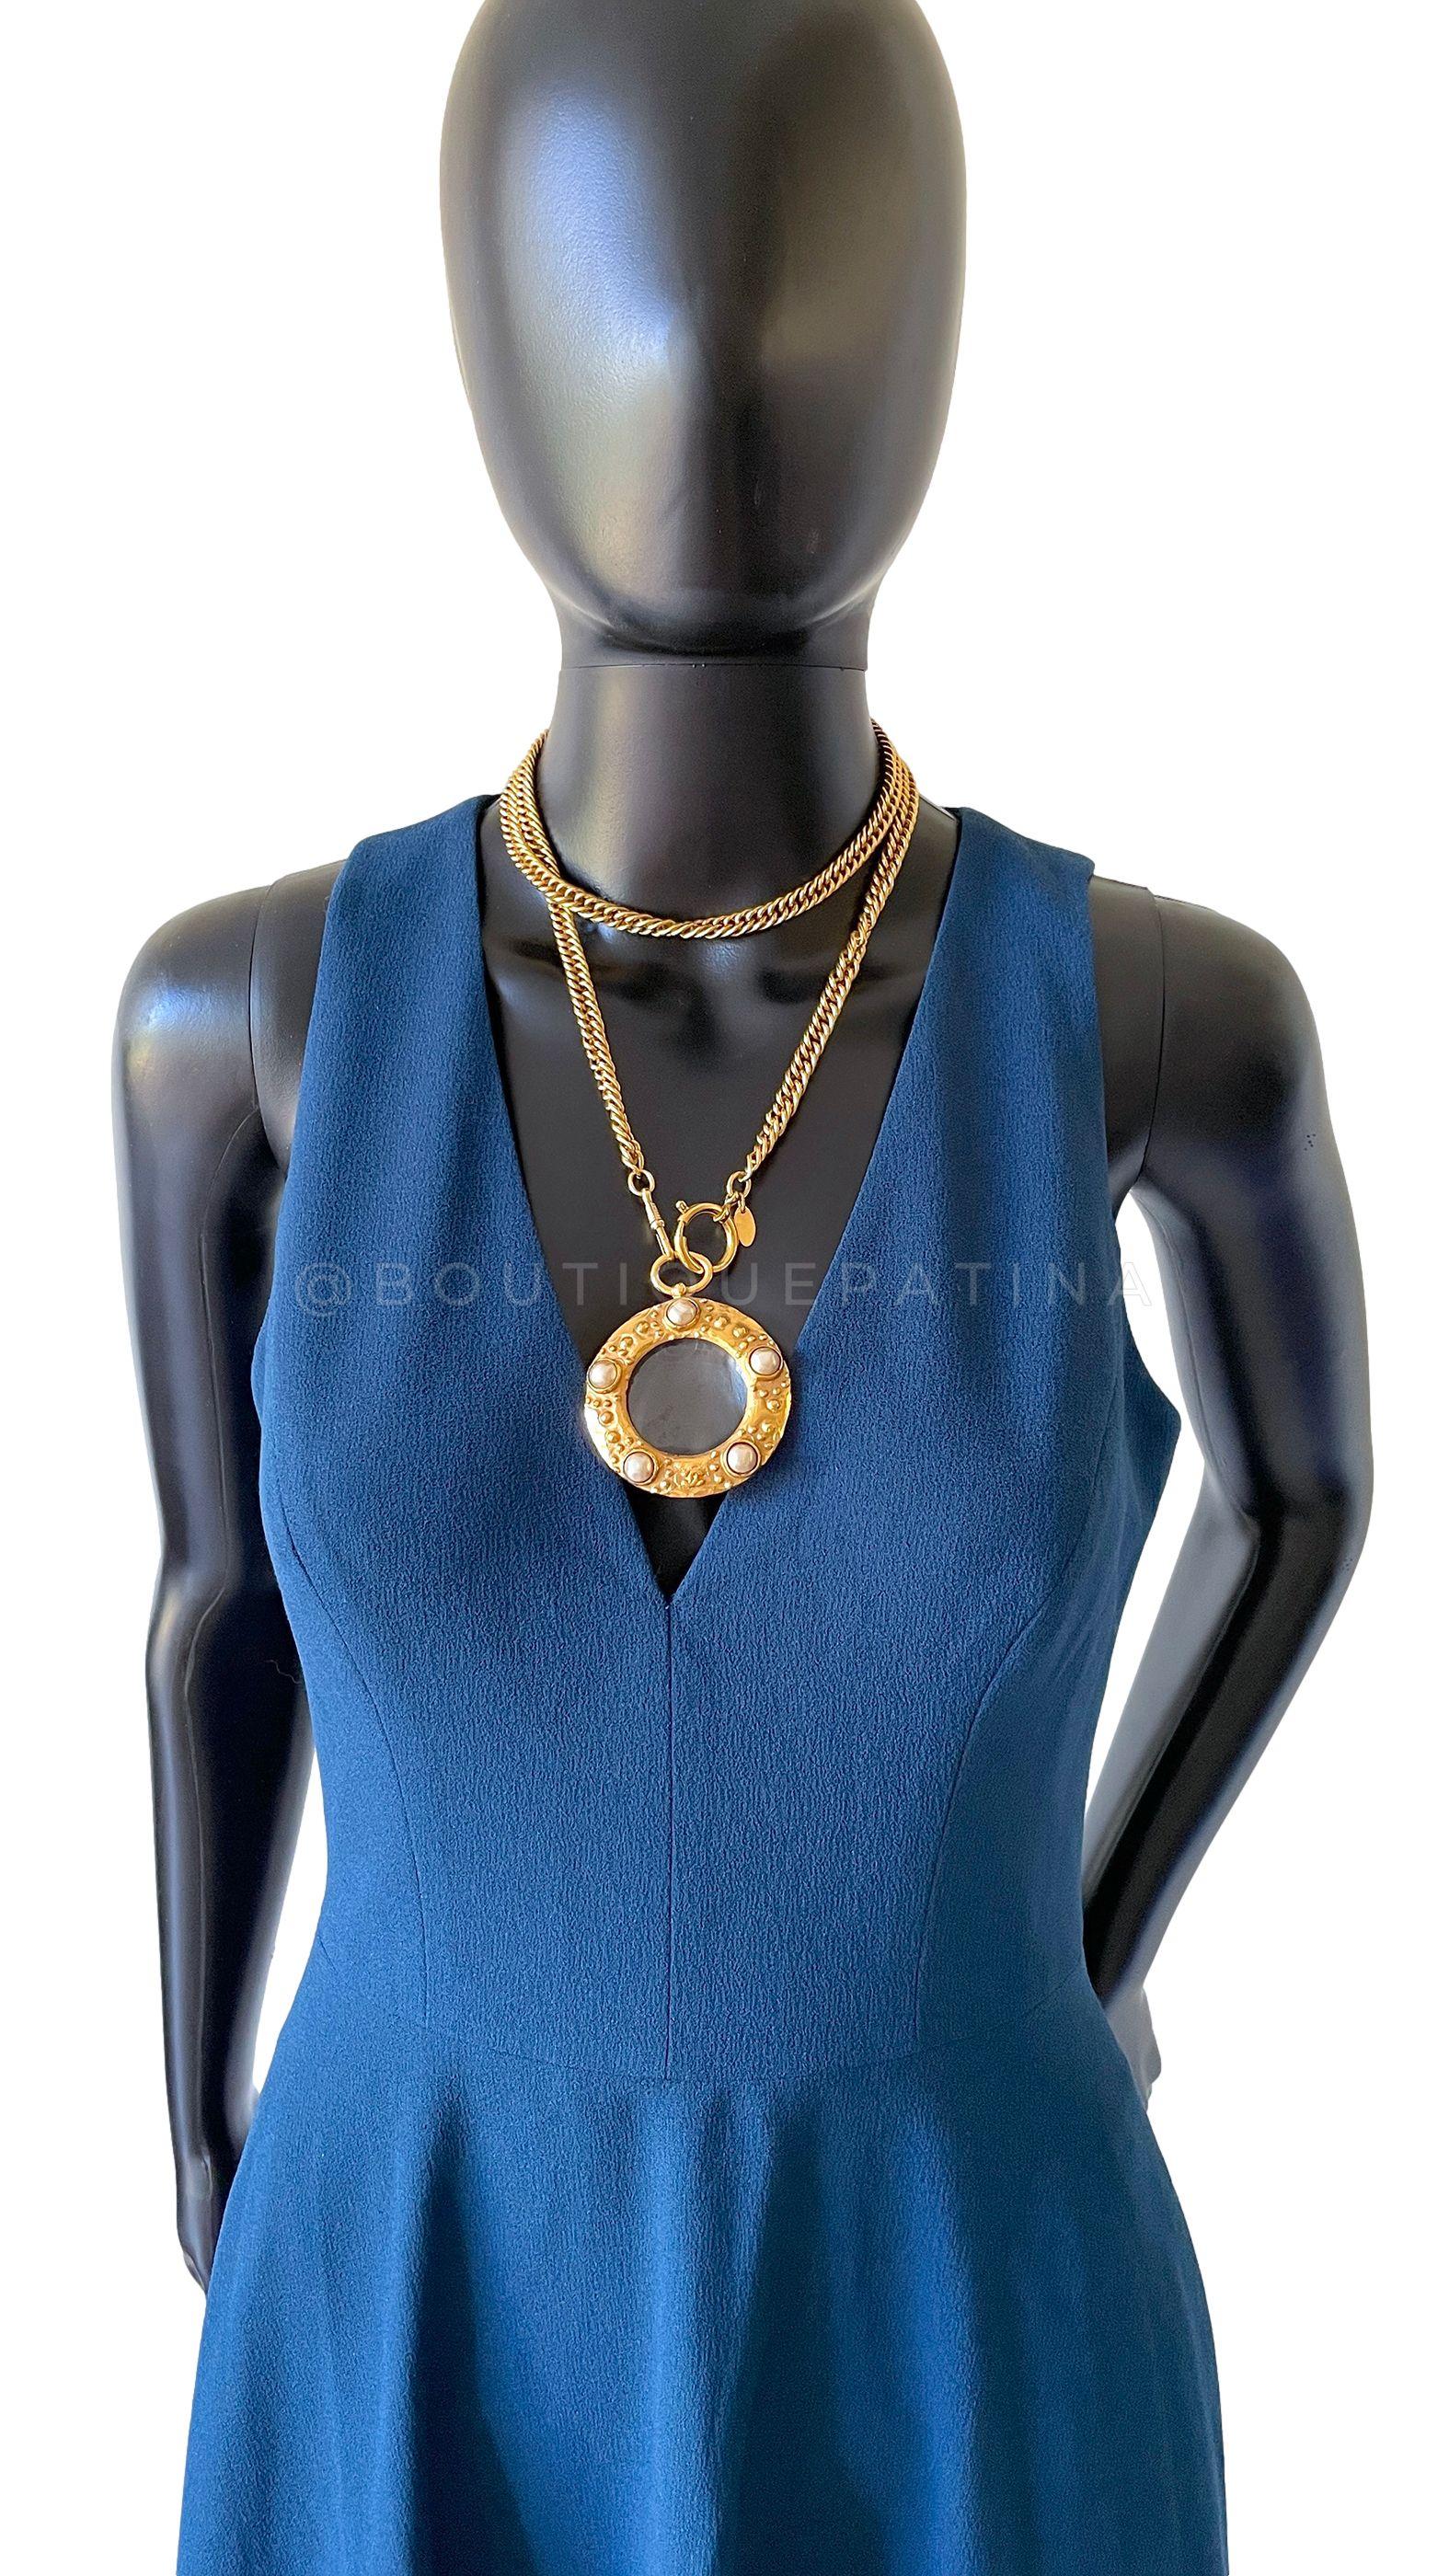 Chanel Vintage Collection 23 Pearl Studded Pendant Long Chain Necklace 65610 In Excellent Condition For Sale In Costa Mesa, CA